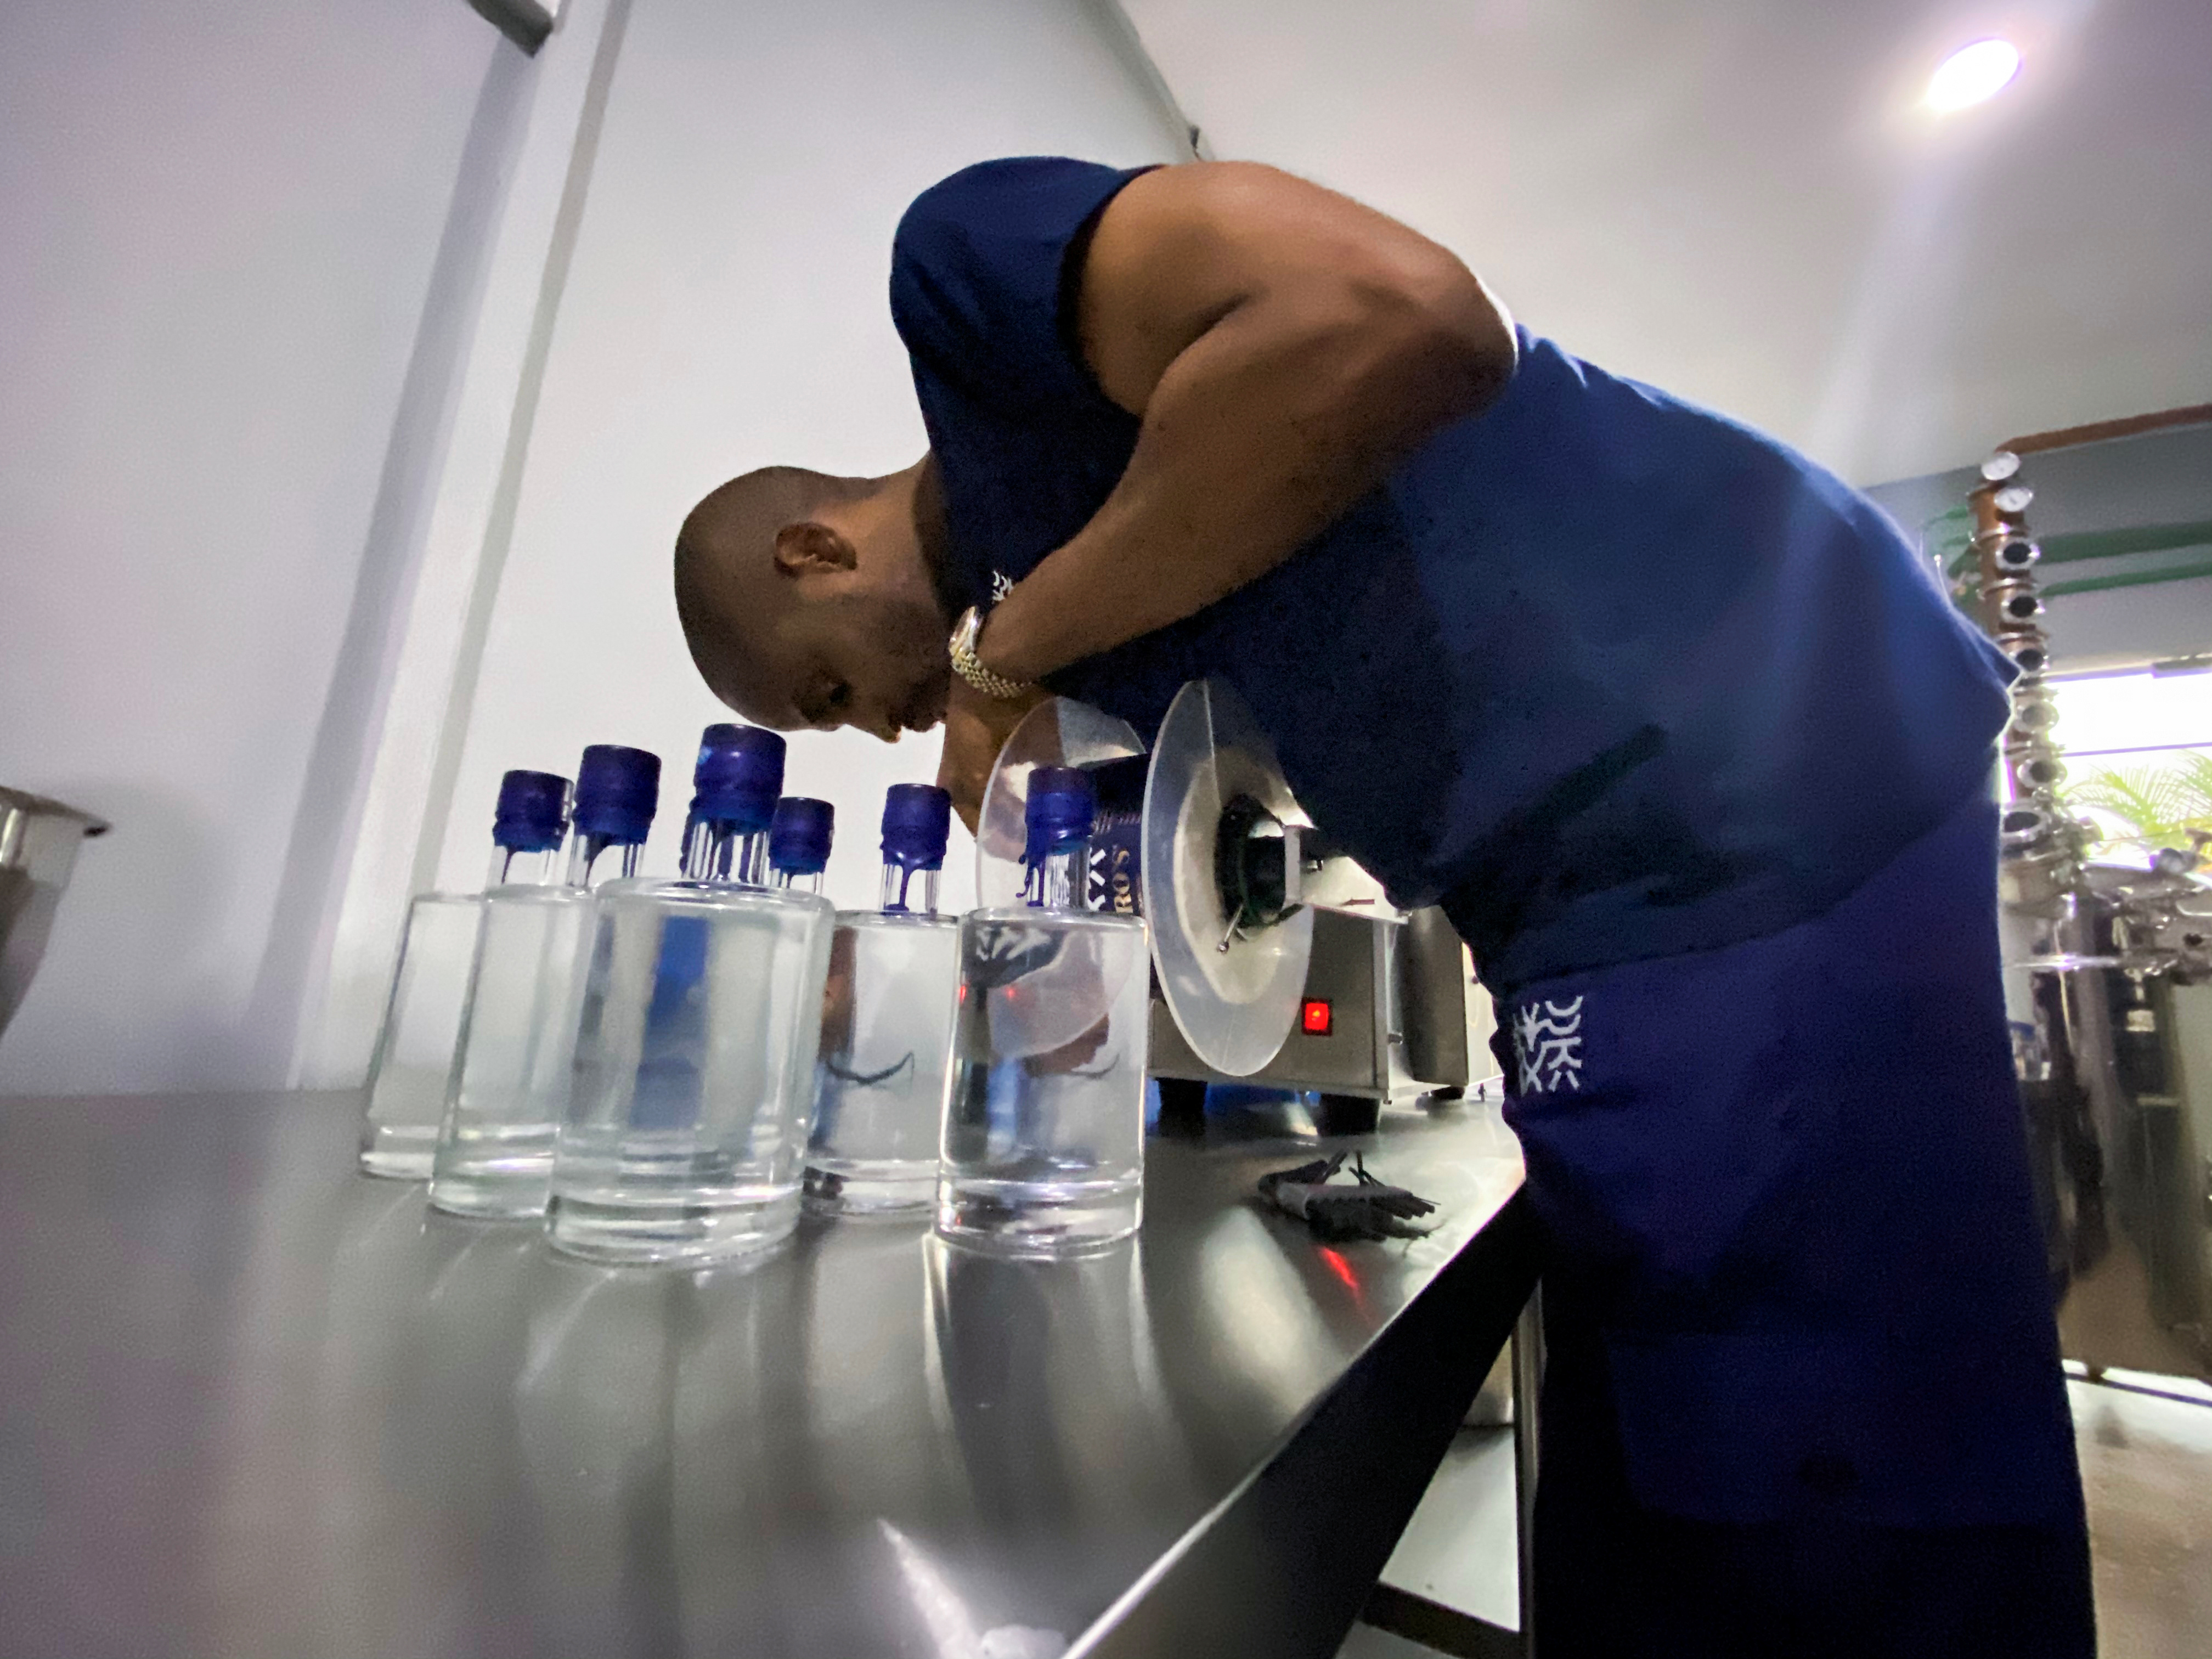 Chibueze Akukwe, co-founder of Pedro's gin distillery is seen fixing a tool during a production in Lagos